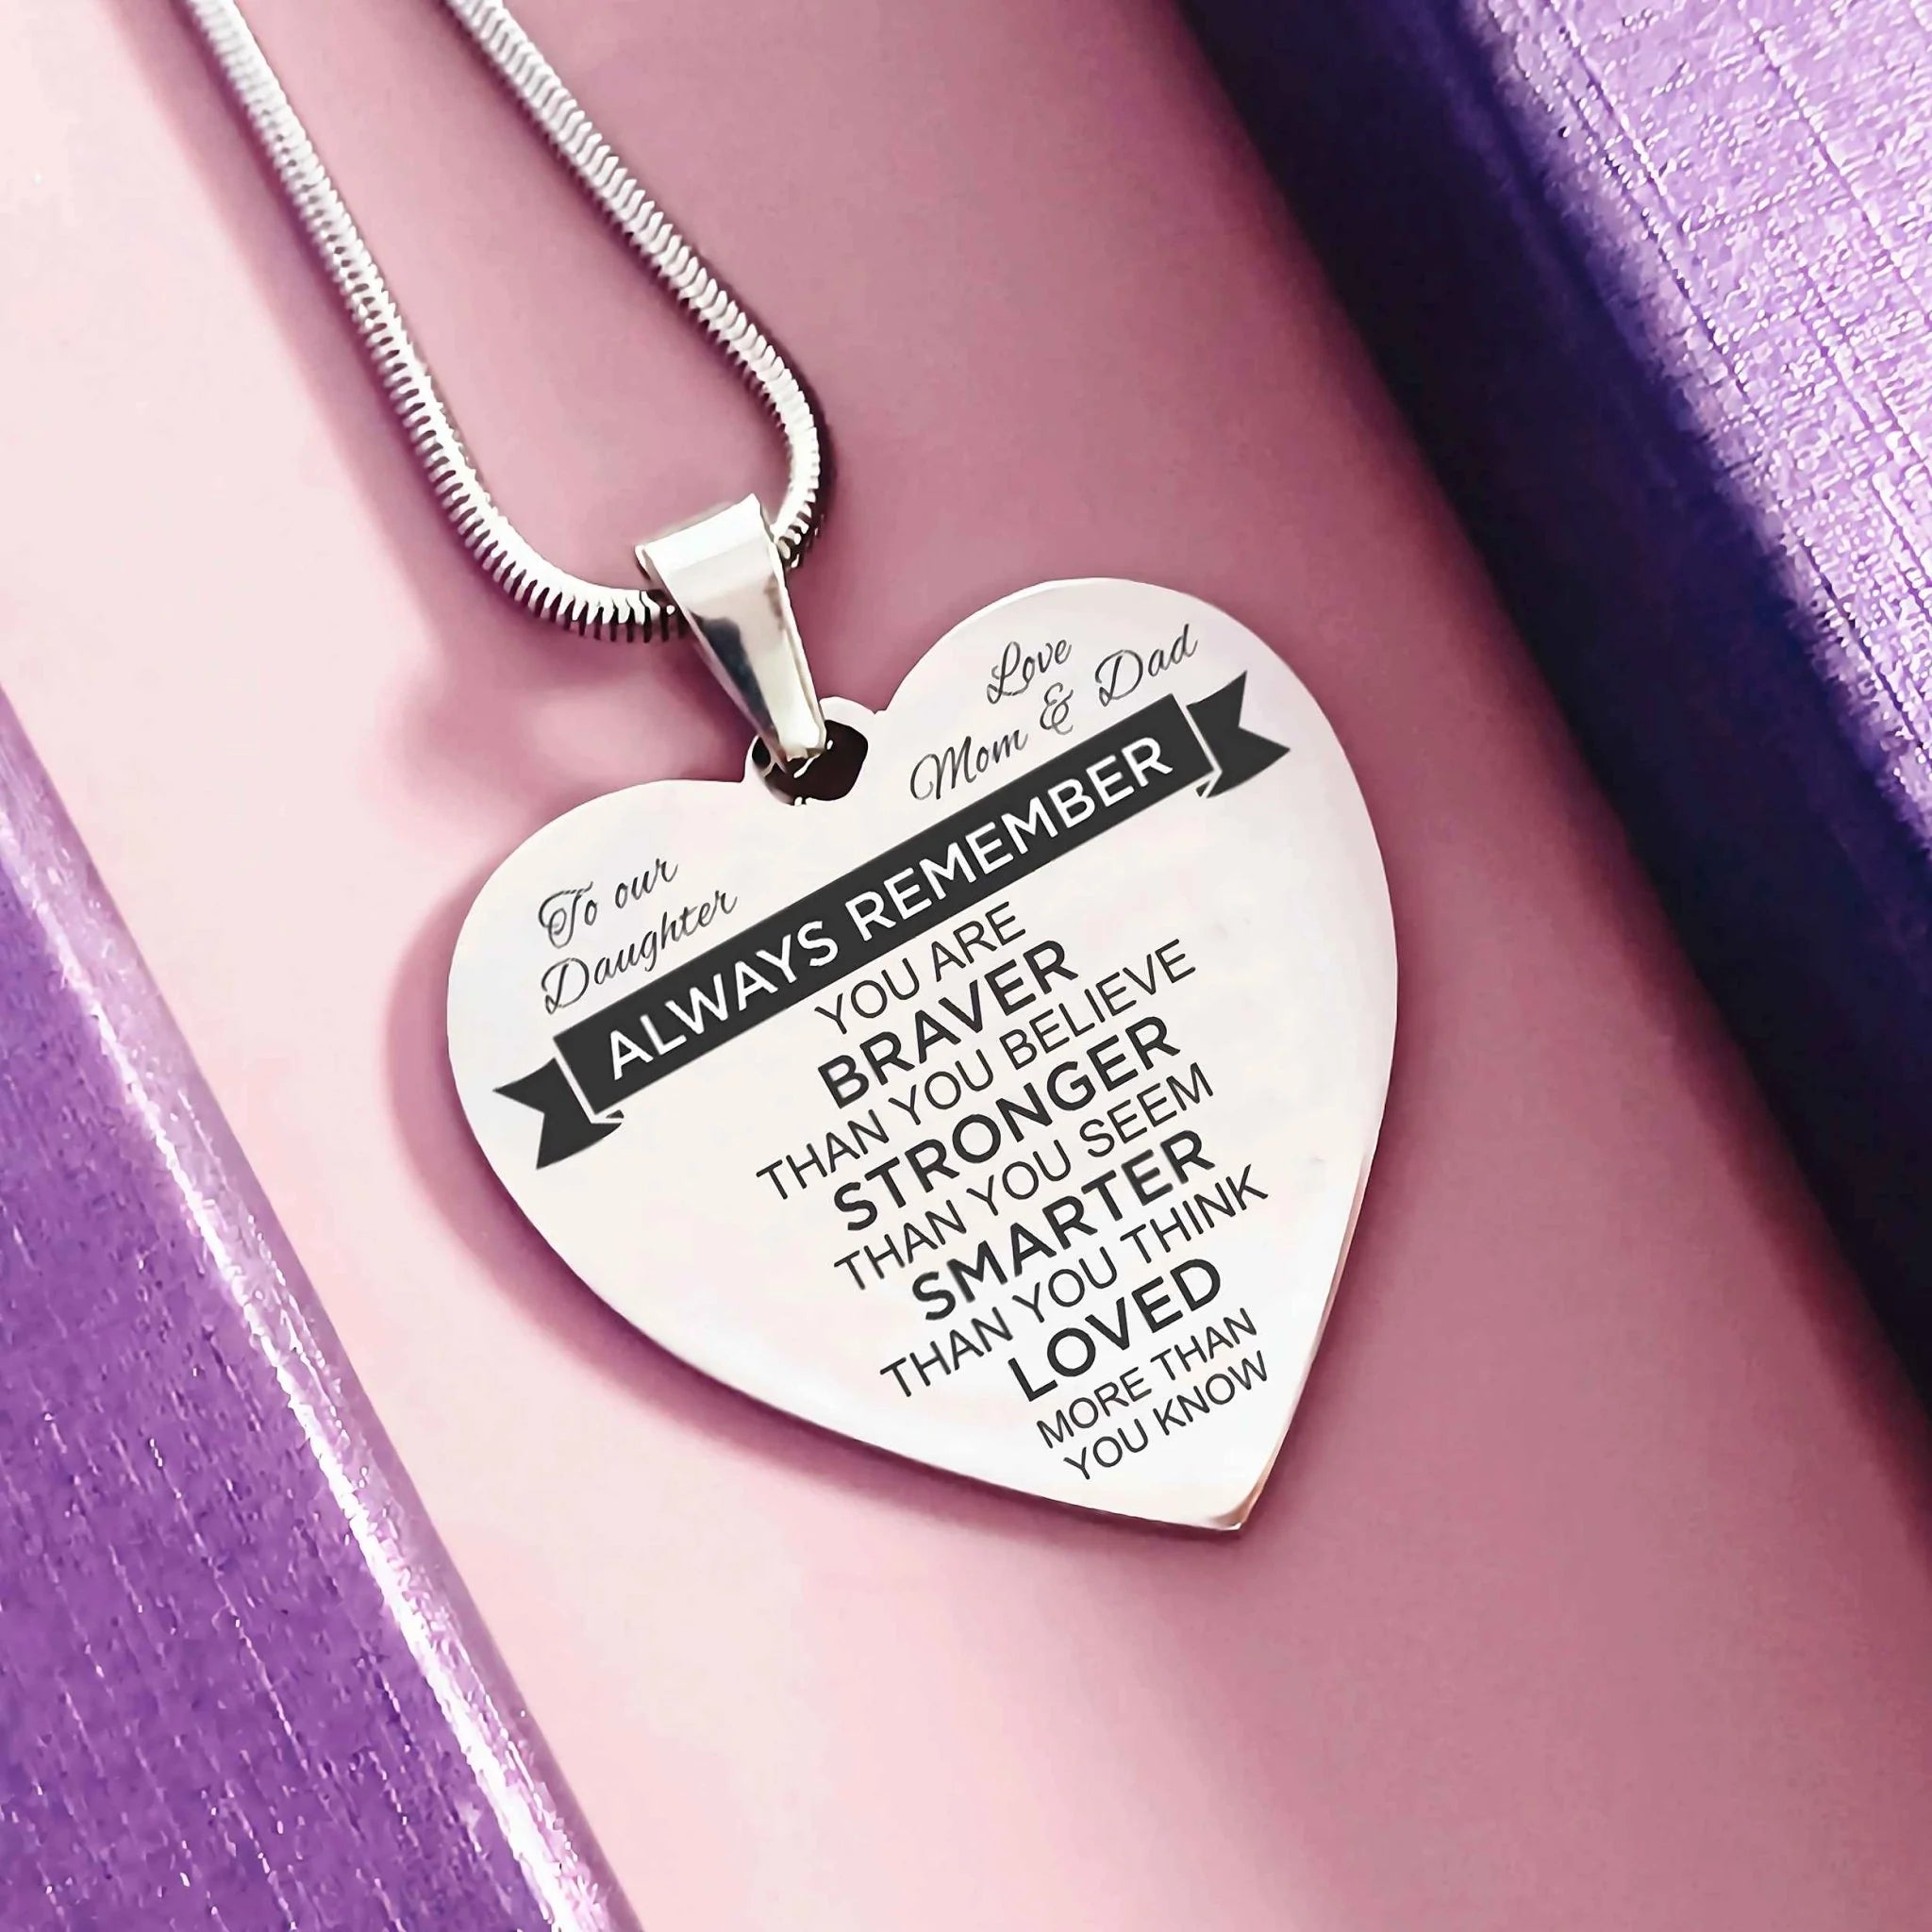 Expressing Love and Gratitude: The Perfect Personalized Jewelry Gifts